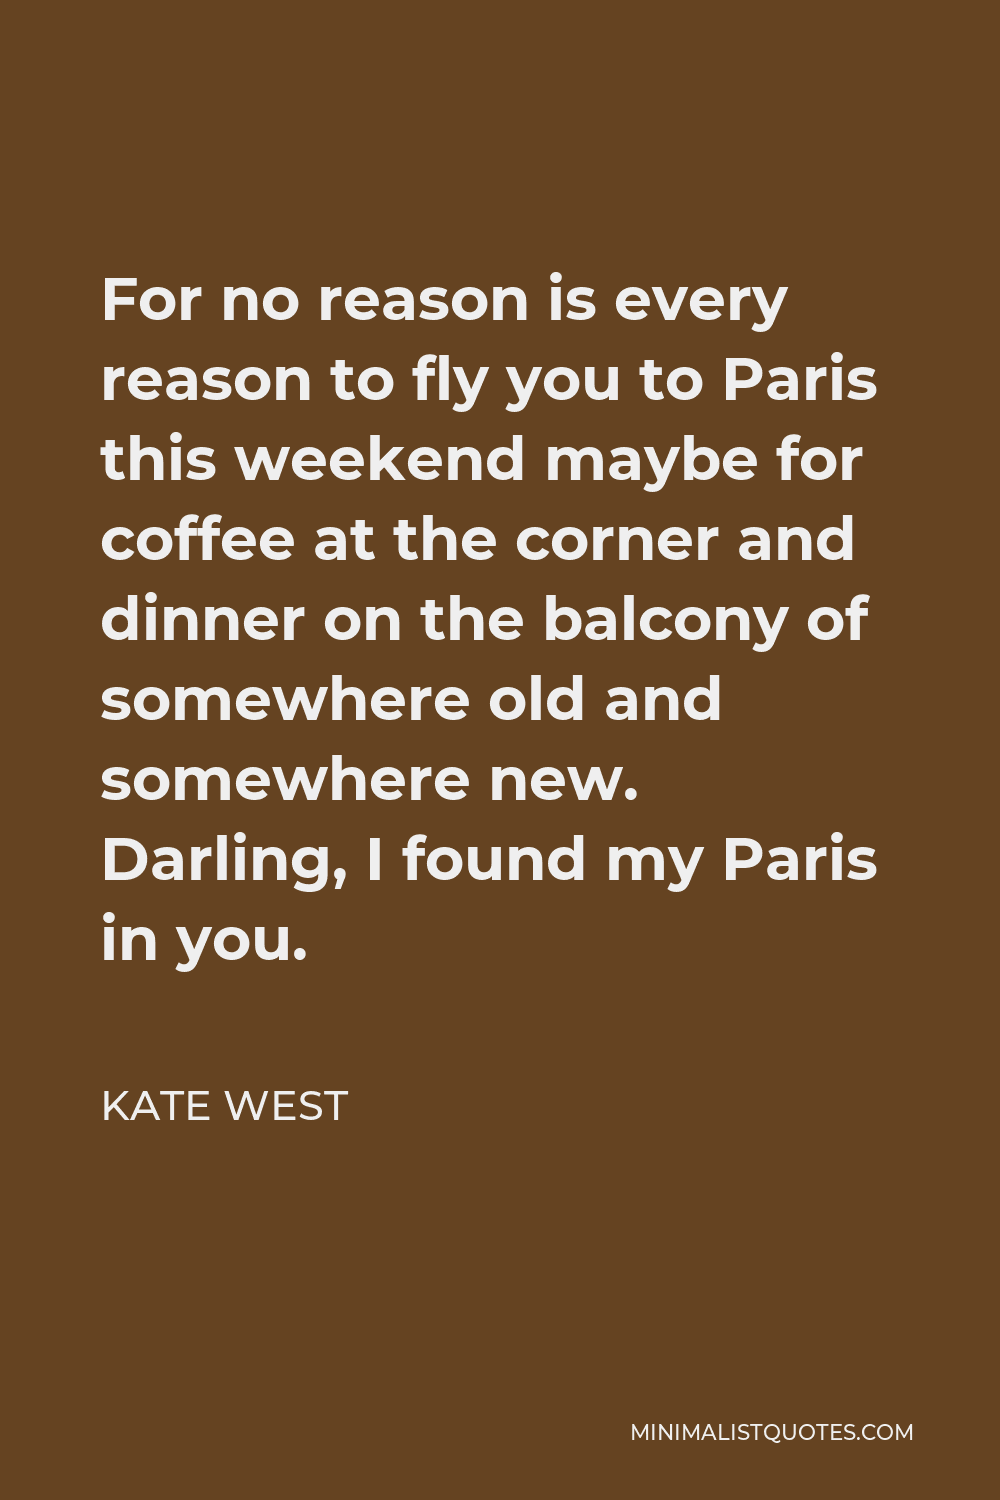 Kate West Quote - For no reason is every reason to fly you to Paris this weekend maybe for coffee at the corner and dinner on the balcony of somewhere old and somewhere new. Darling, I found my Paris in you.